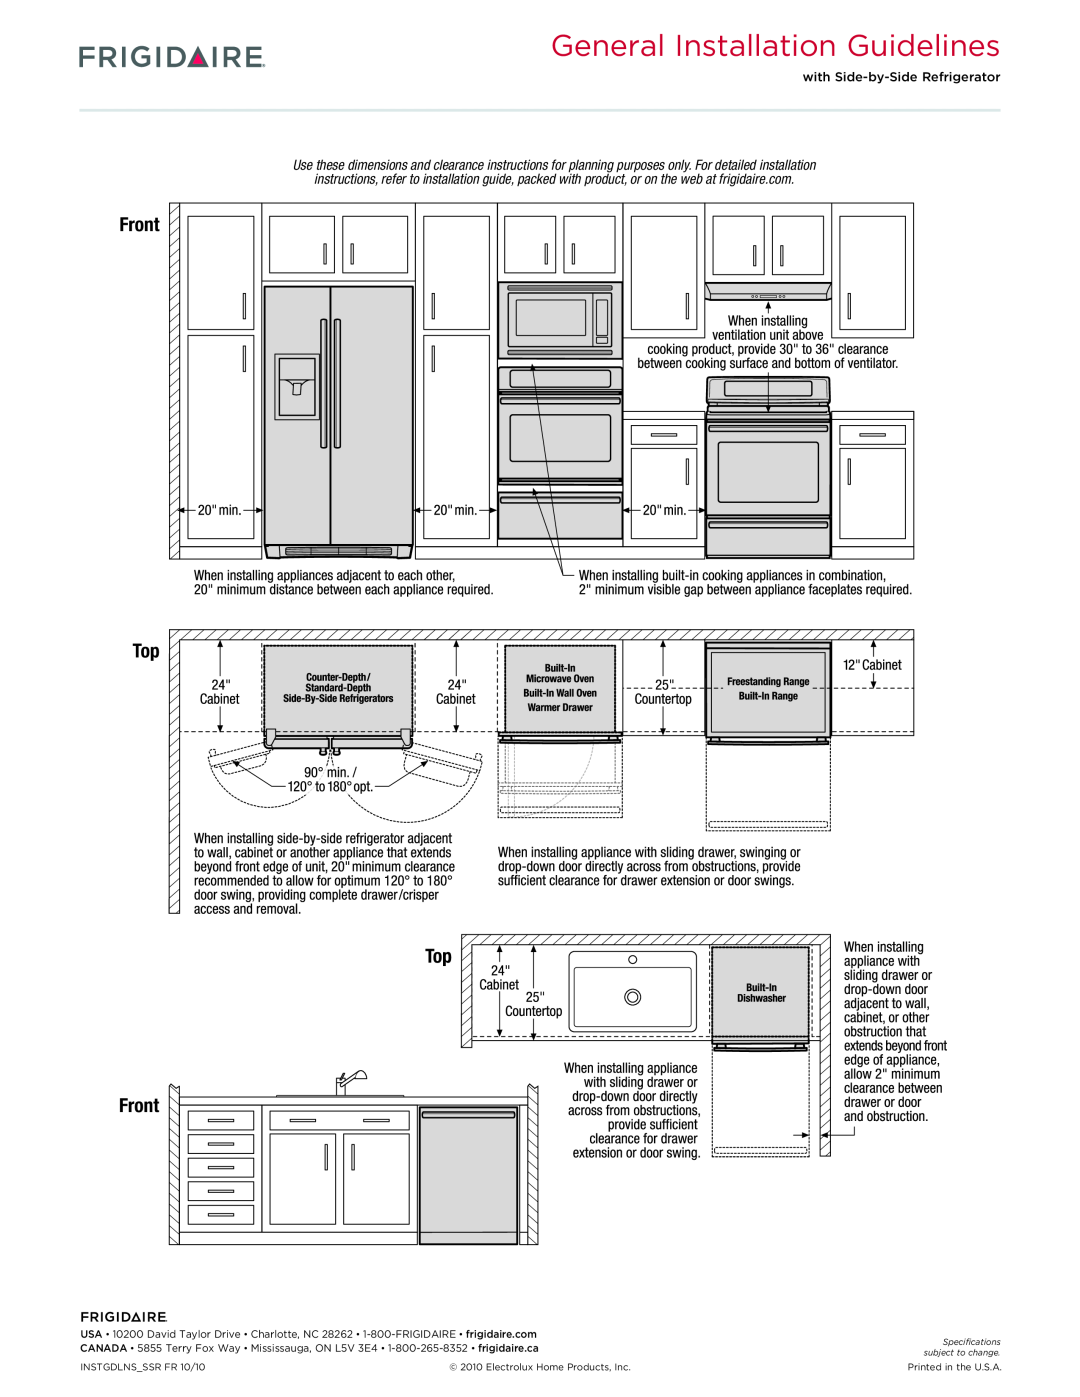 Frigidaire FGEW3045K F/W/B dimensions General Installation Guidelines, Top Front 